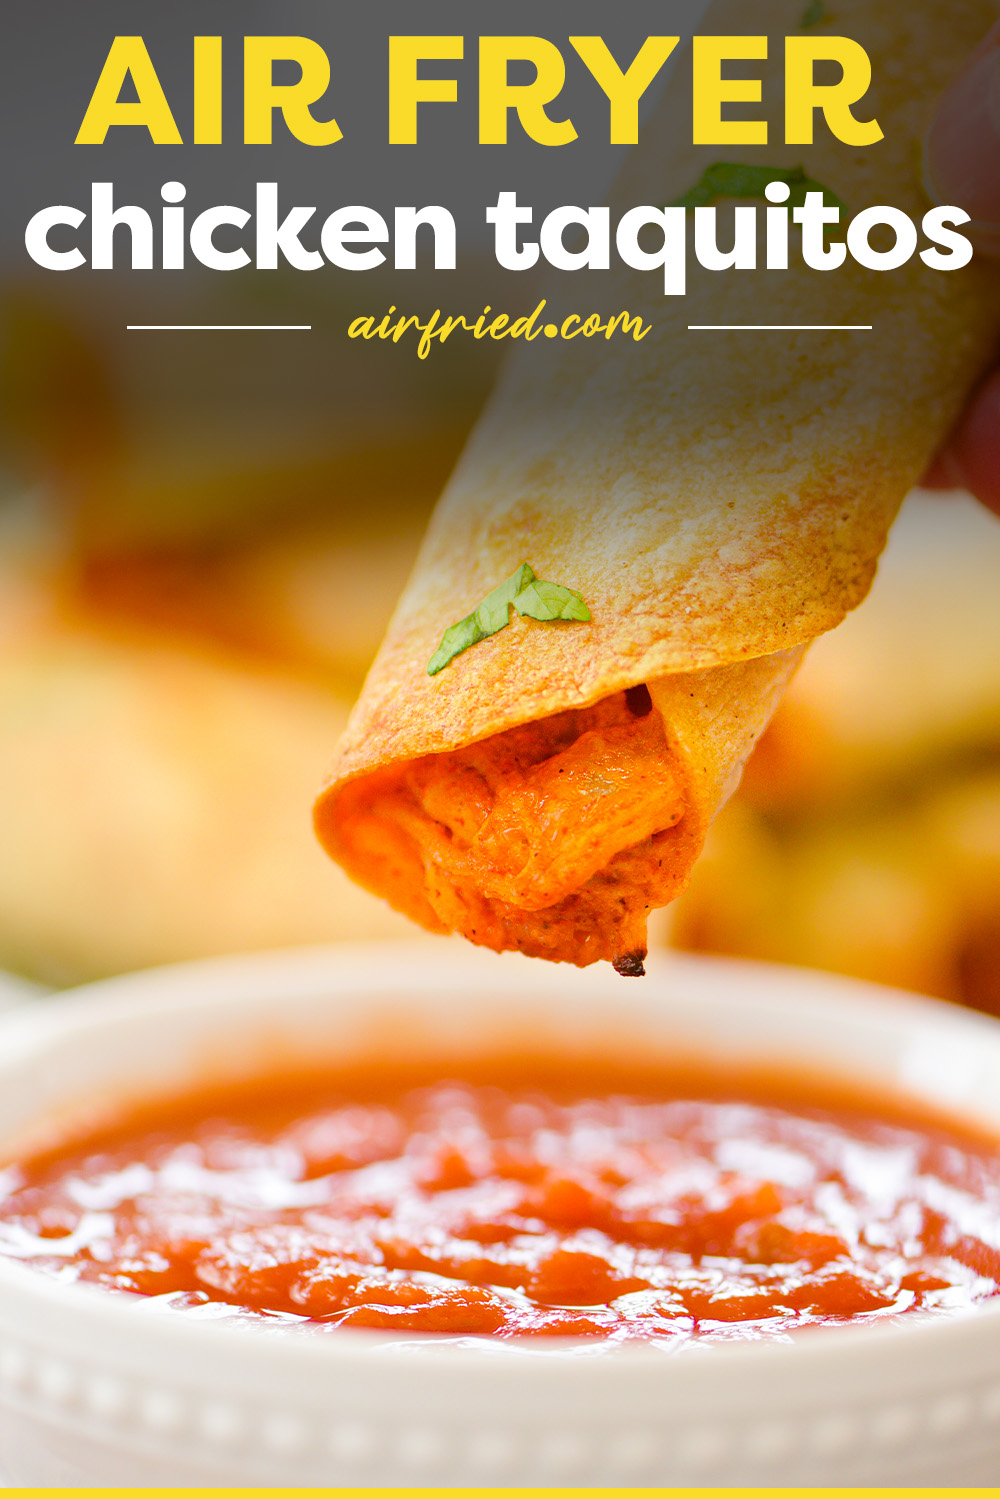 A chicken taquito being dipped into salsa.